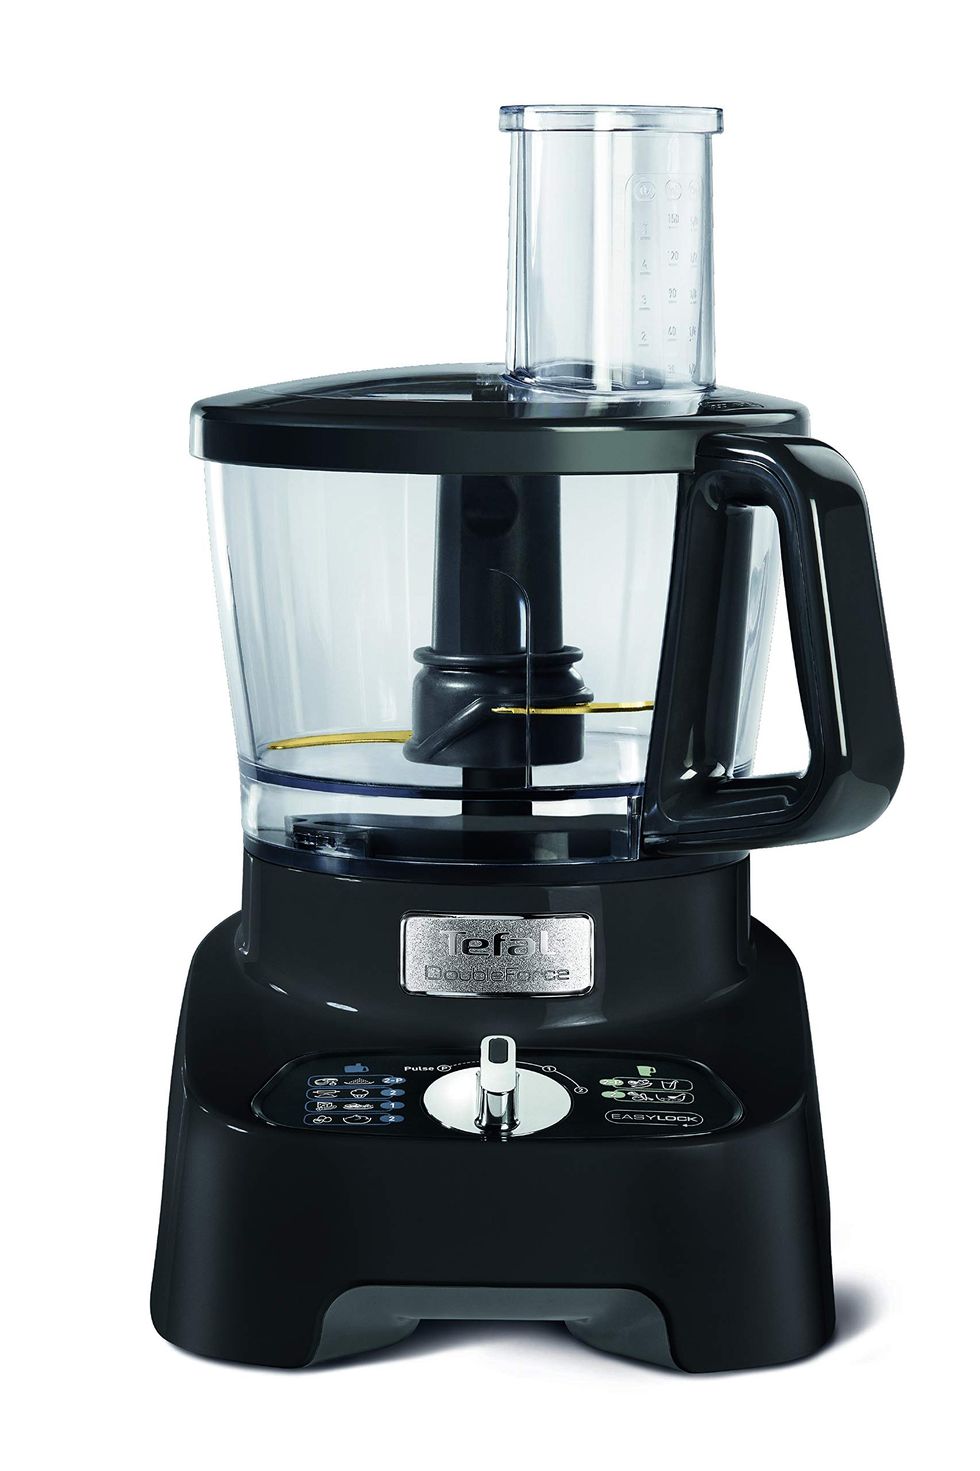 Tefal Double Force Pro DO821840 Multifunction Food Processor